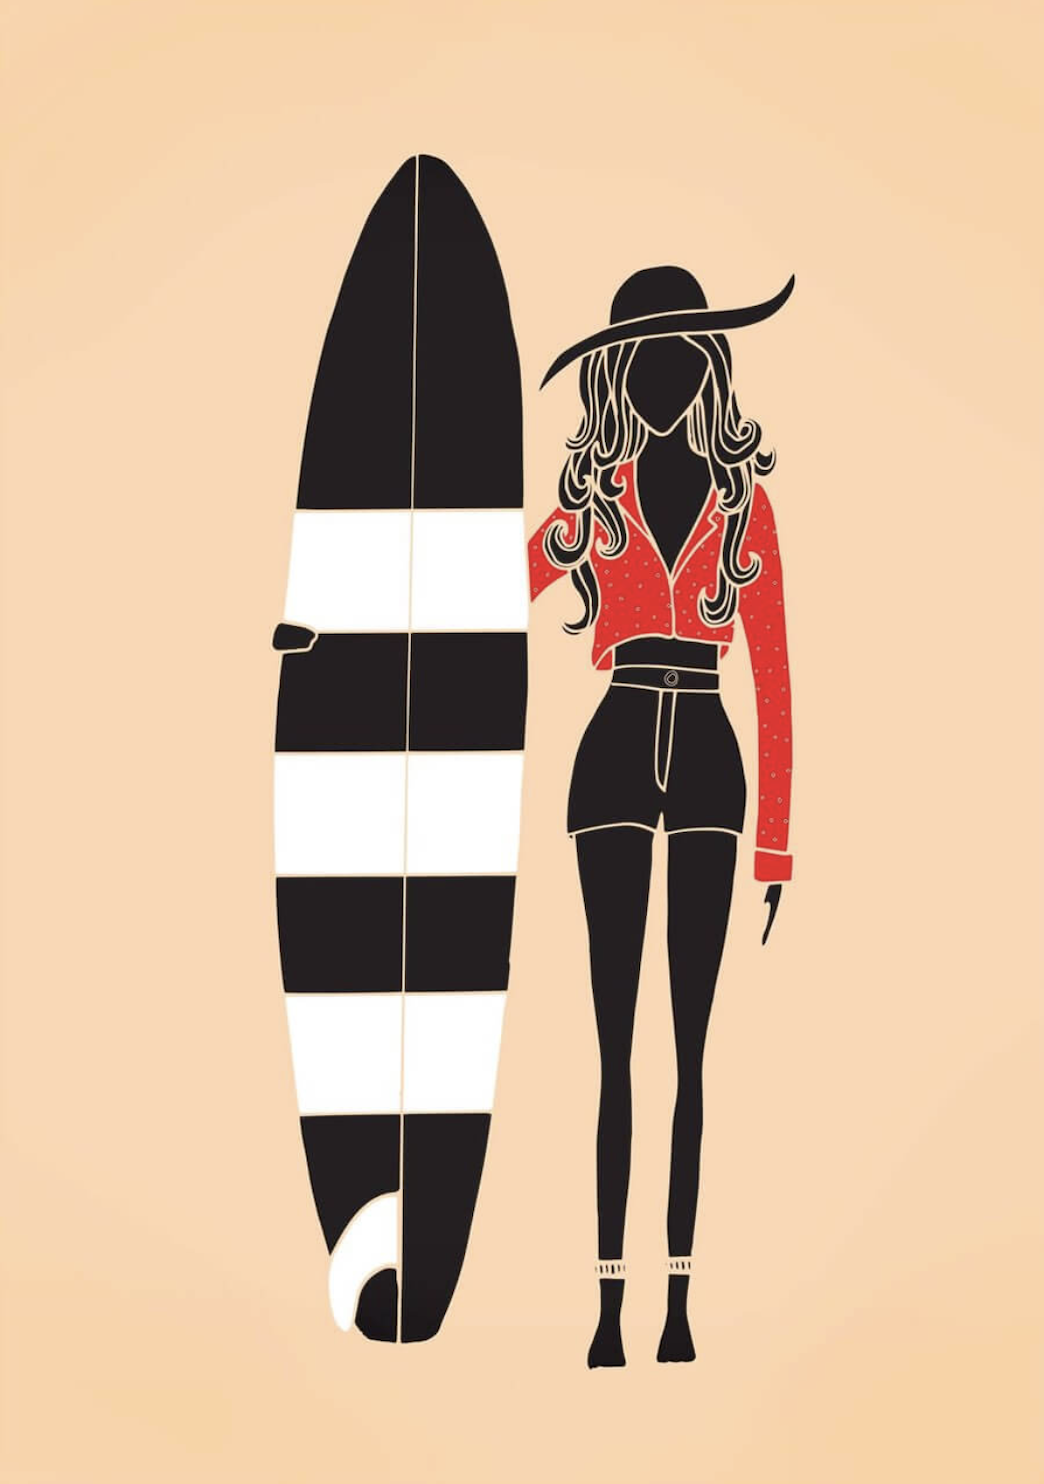 Drawing of a girl in a red shirt with a big hat holdin a surfboard